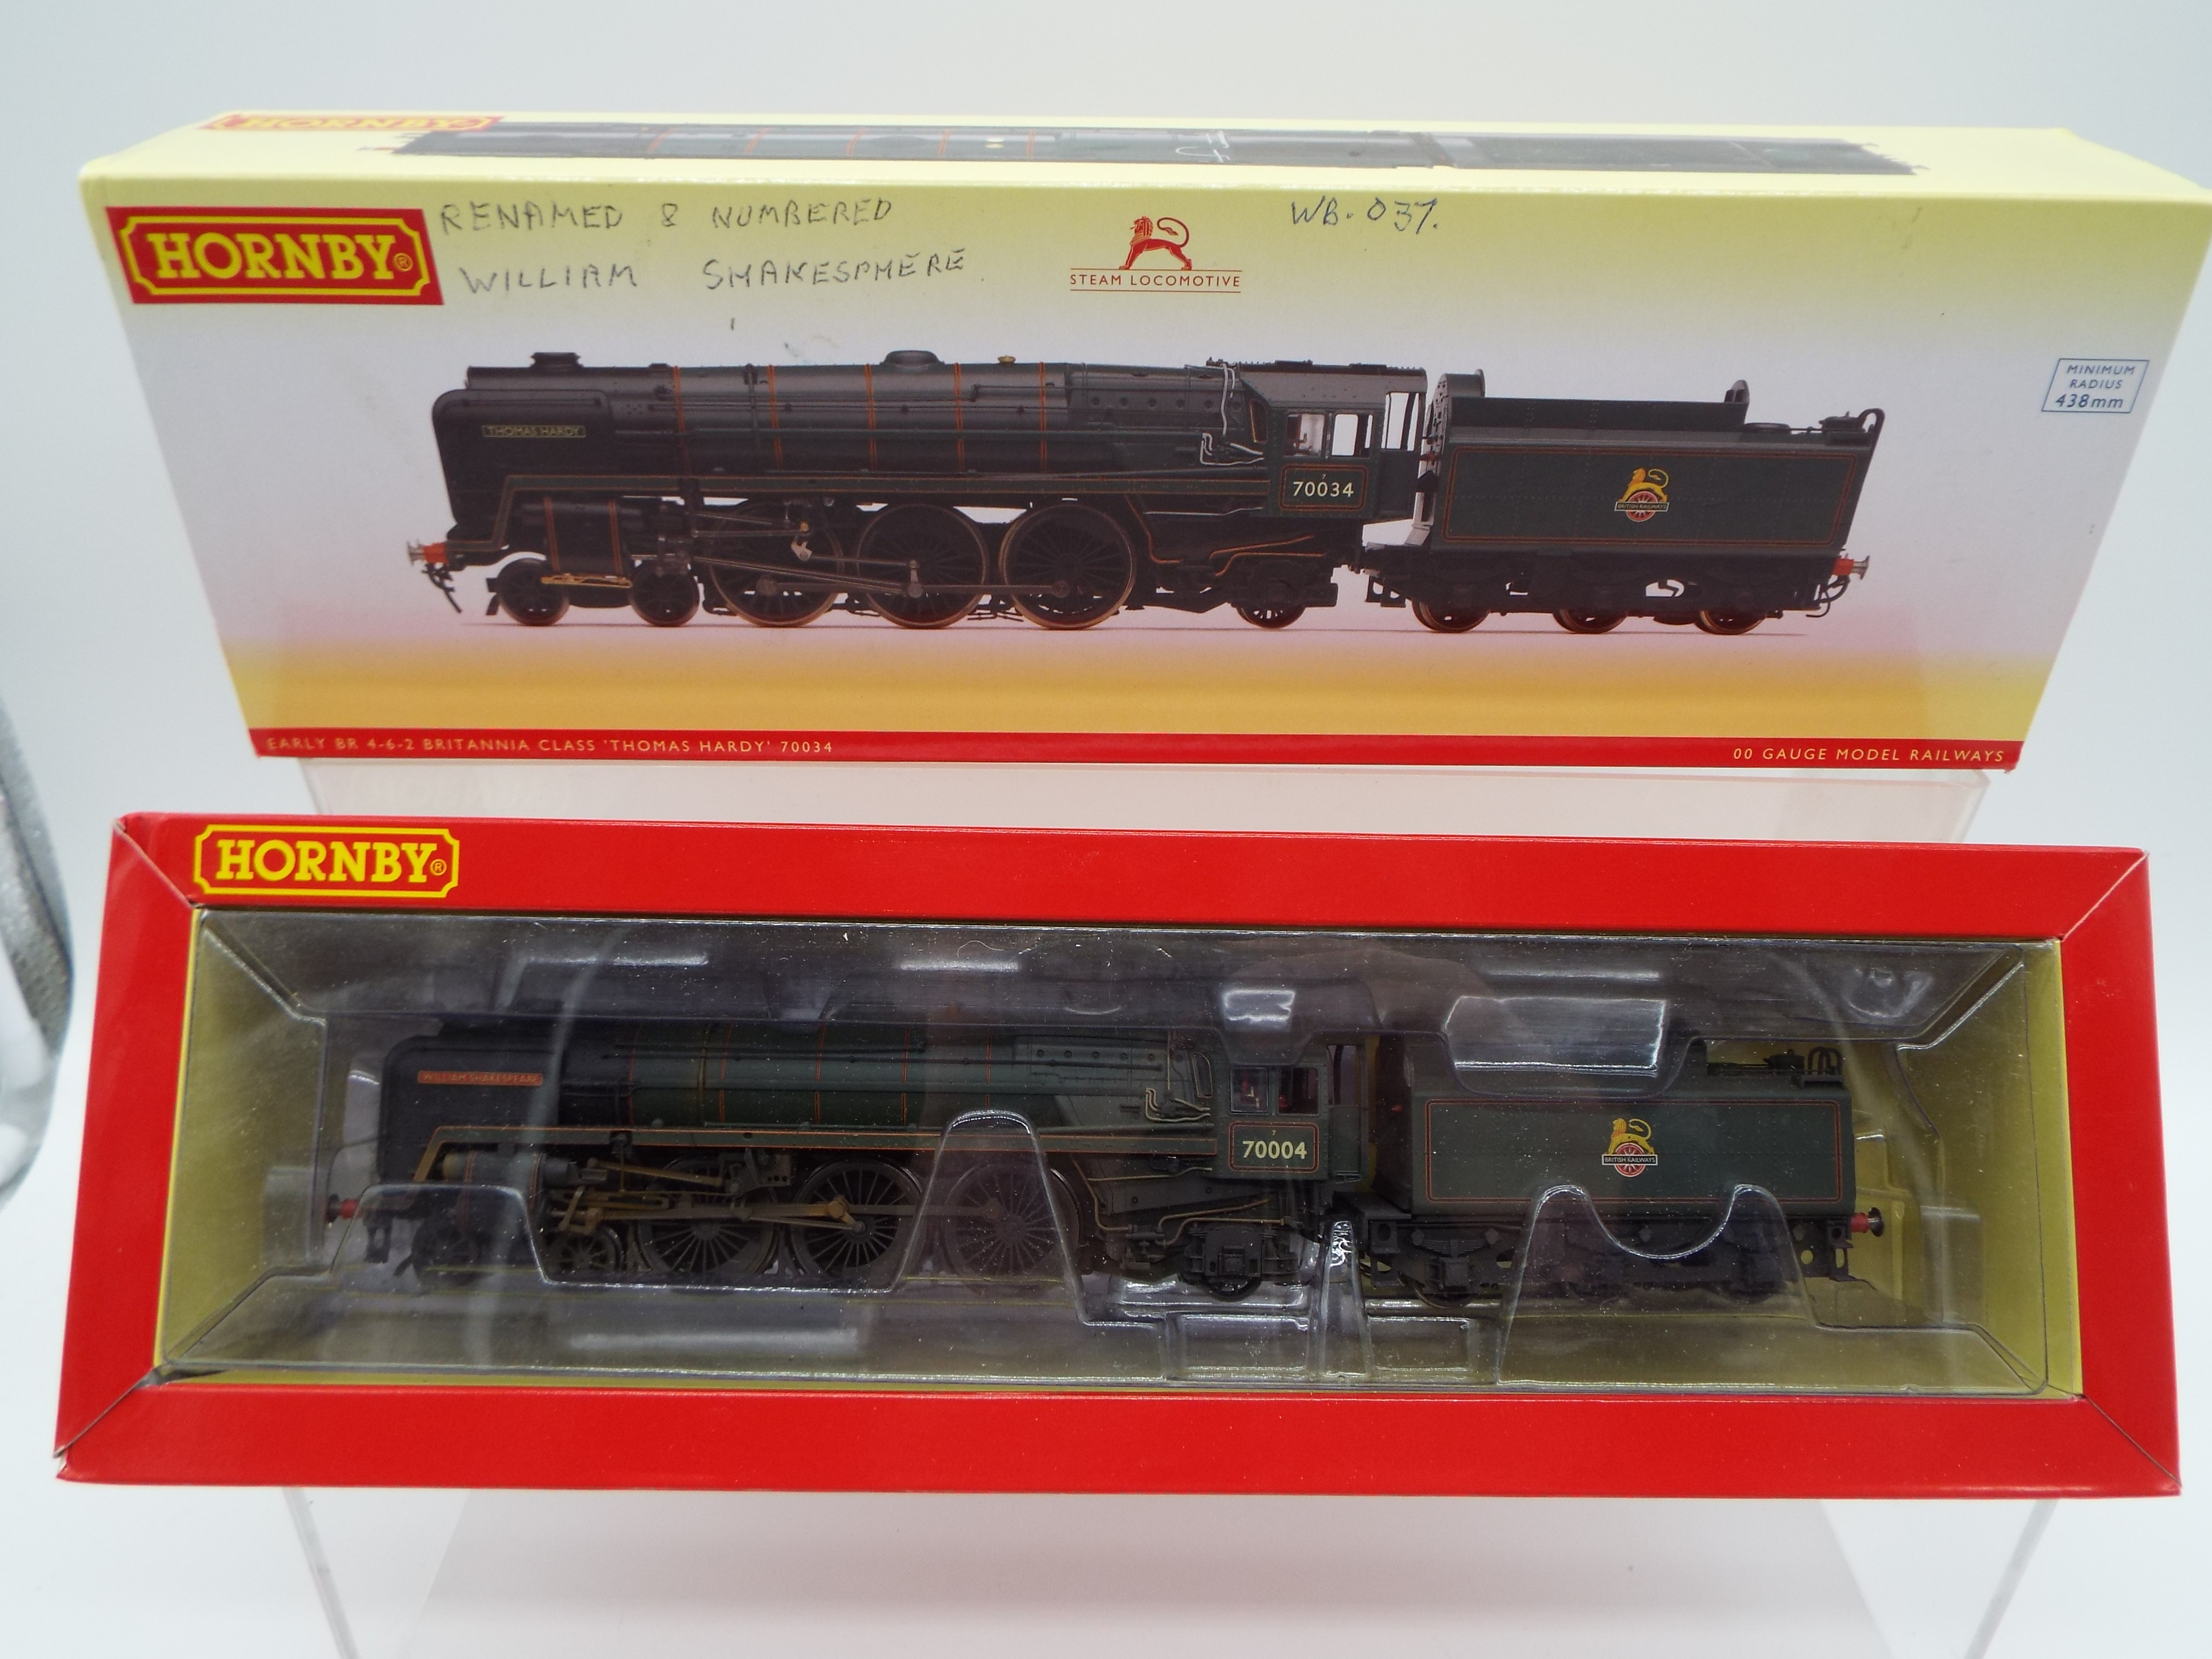 Hornby - an OO gauge model DCC fitted 4-6-2 locomotive and tender running no originally 70034